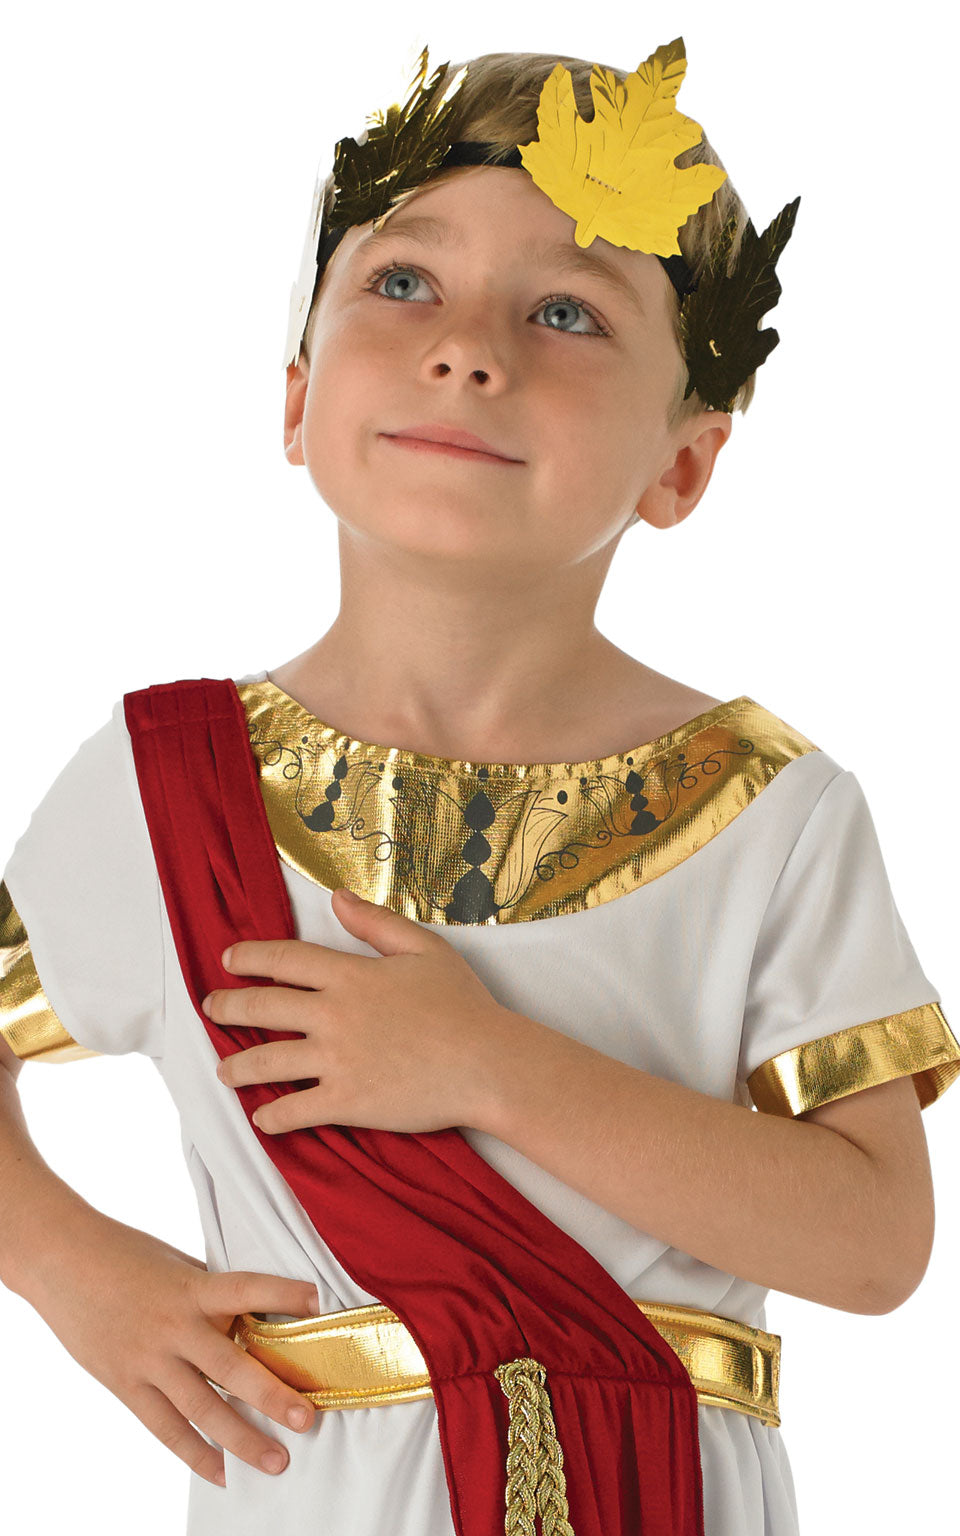 Roman Boy Fancy Dress Costume includes tunic with sash and wreath